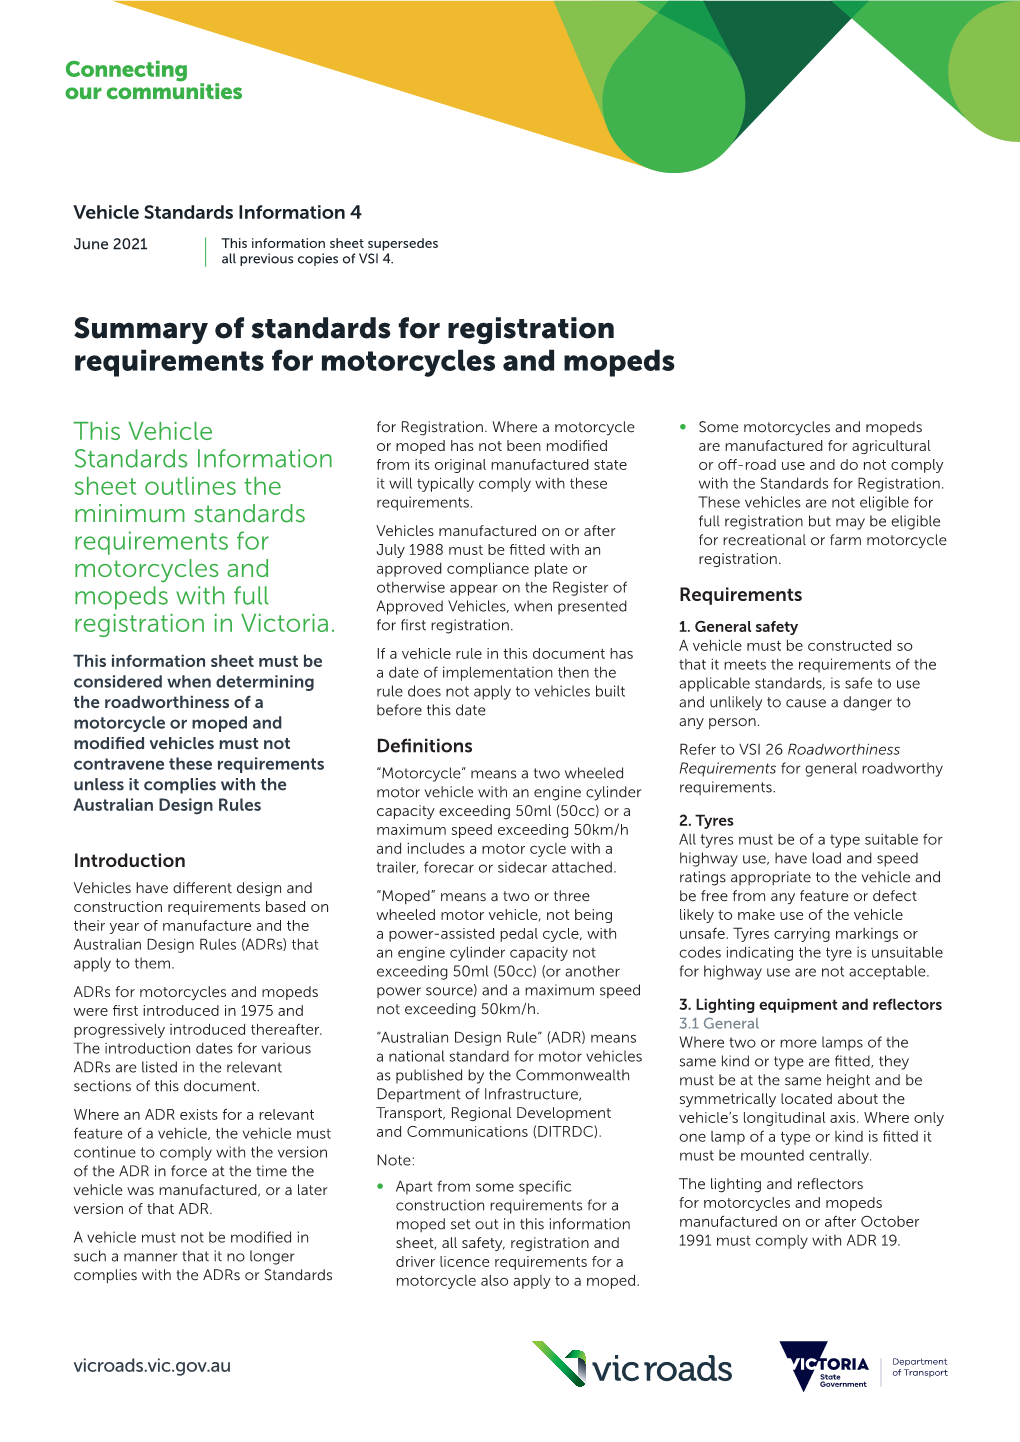 Summary of Registration Requirements for Motorcycles and Mopeds